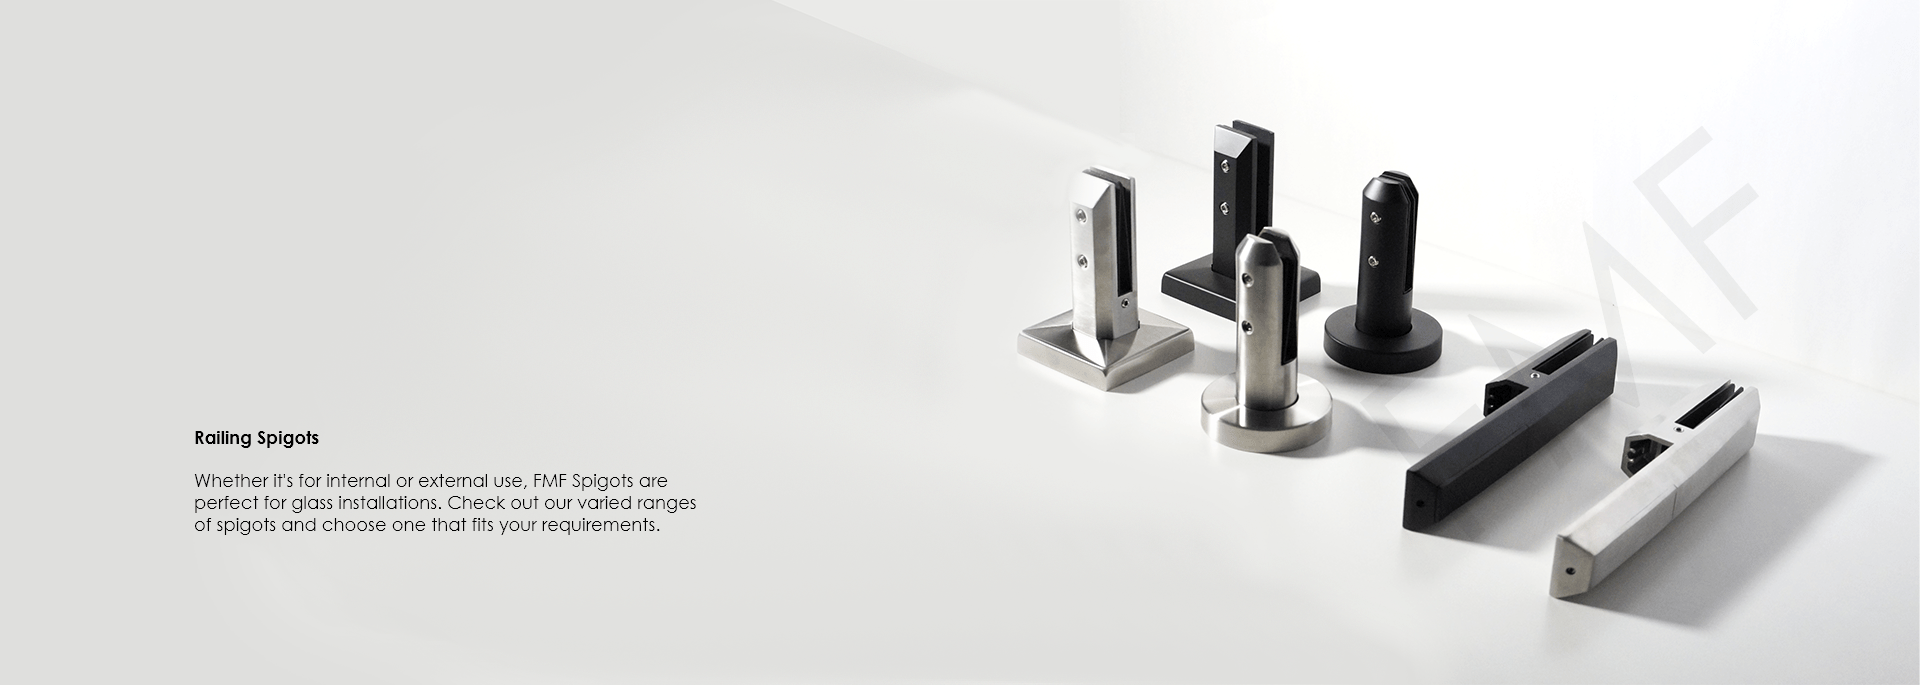 Whether it's for internal or external use, FMF Spigots are perfect for glass installations. Check out our varied ranges of spigots and choose one that fits your requirements.